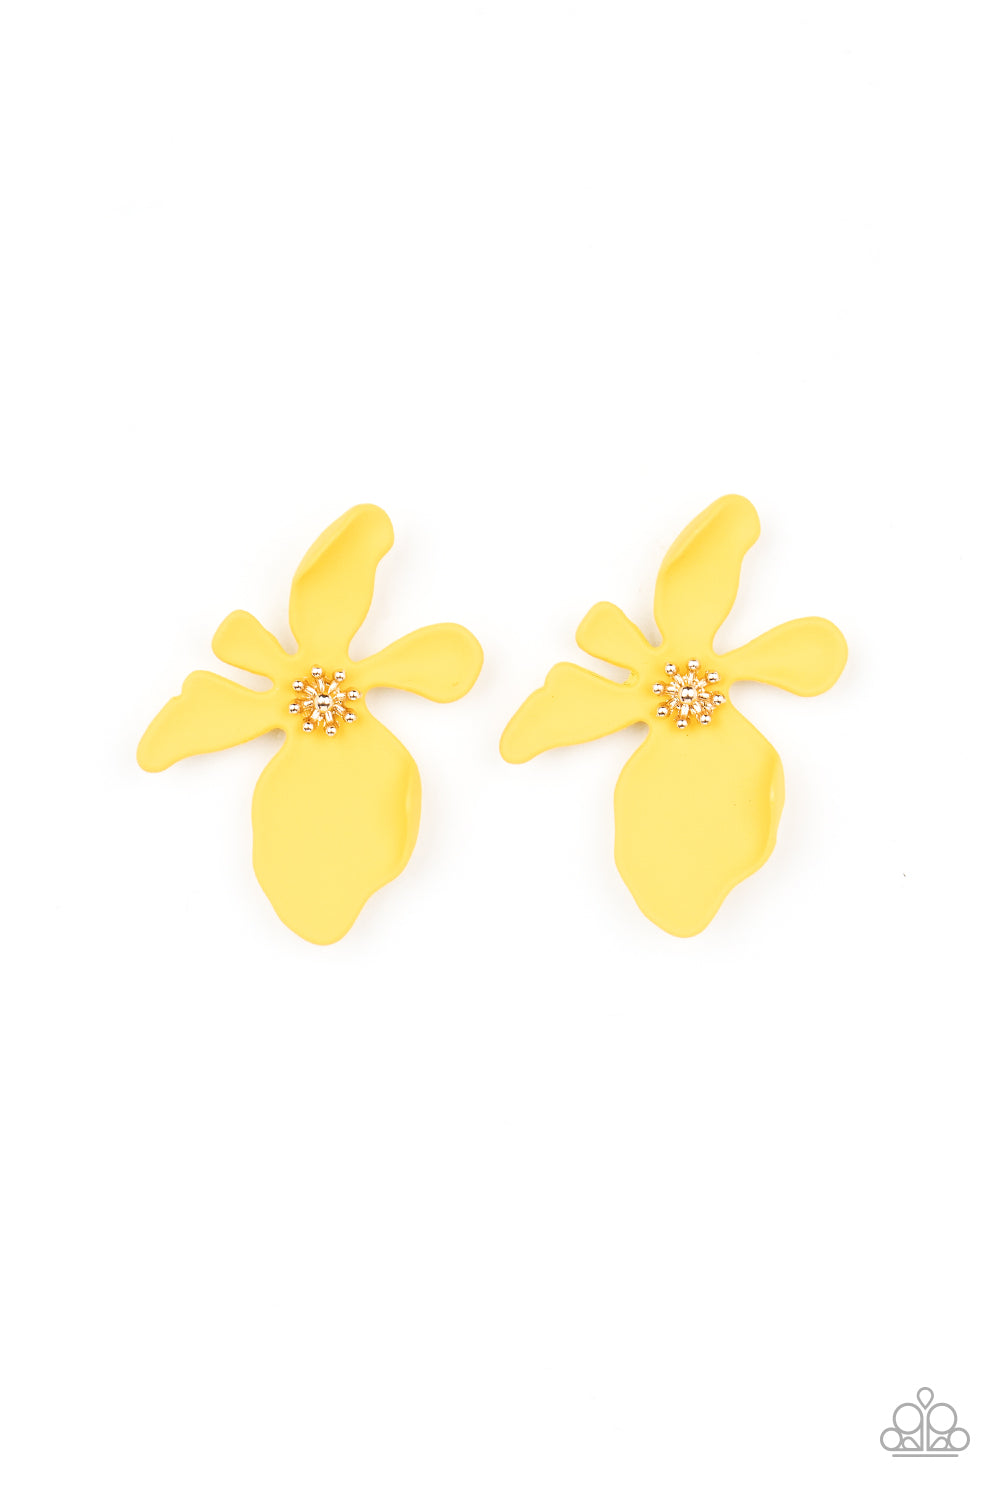 Hawaiian Heiress Yellow Post Earring - Paparazzi Accessories  Featuring a golden studded center, asymmetrical Illuminating petals bloom into an abstract flower for a tropical inspired look. Earring attaches to a standard post fitting.  Sold as one pair of post earrings.